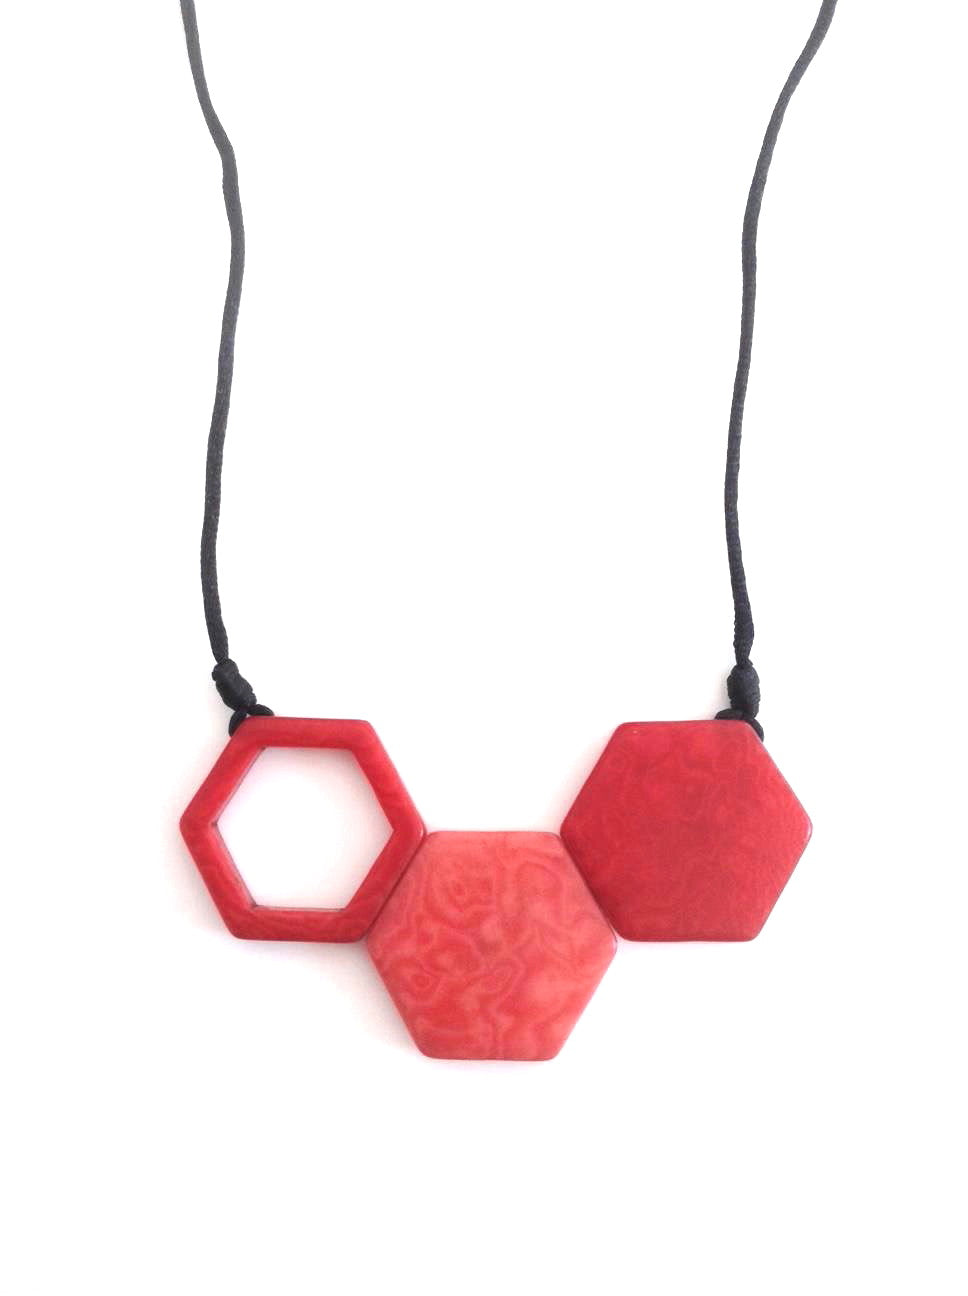 Rombos Necklace - Red & Pink Tones